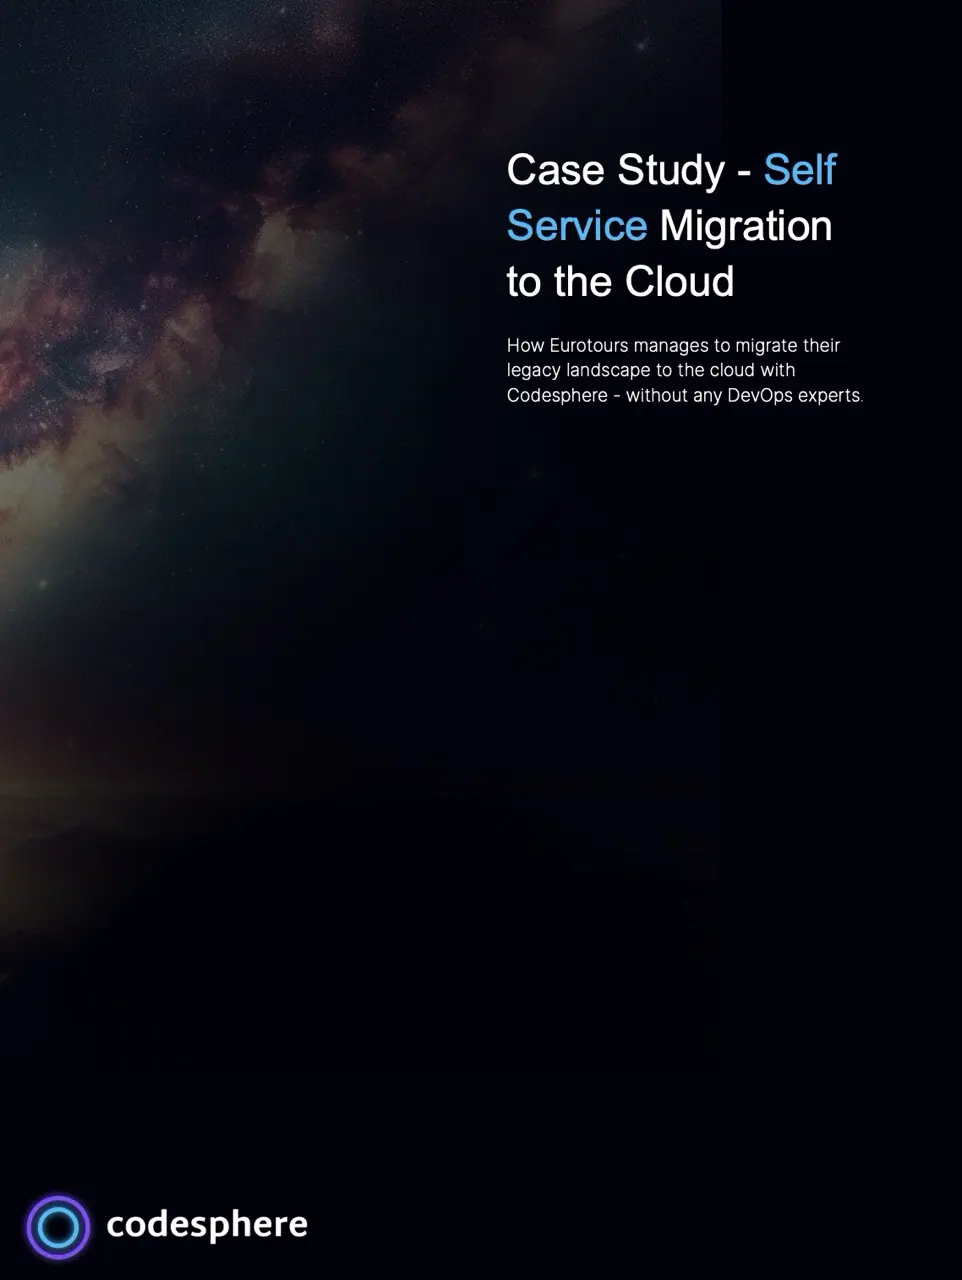 Case Study - Self Service Migration in the Cloud